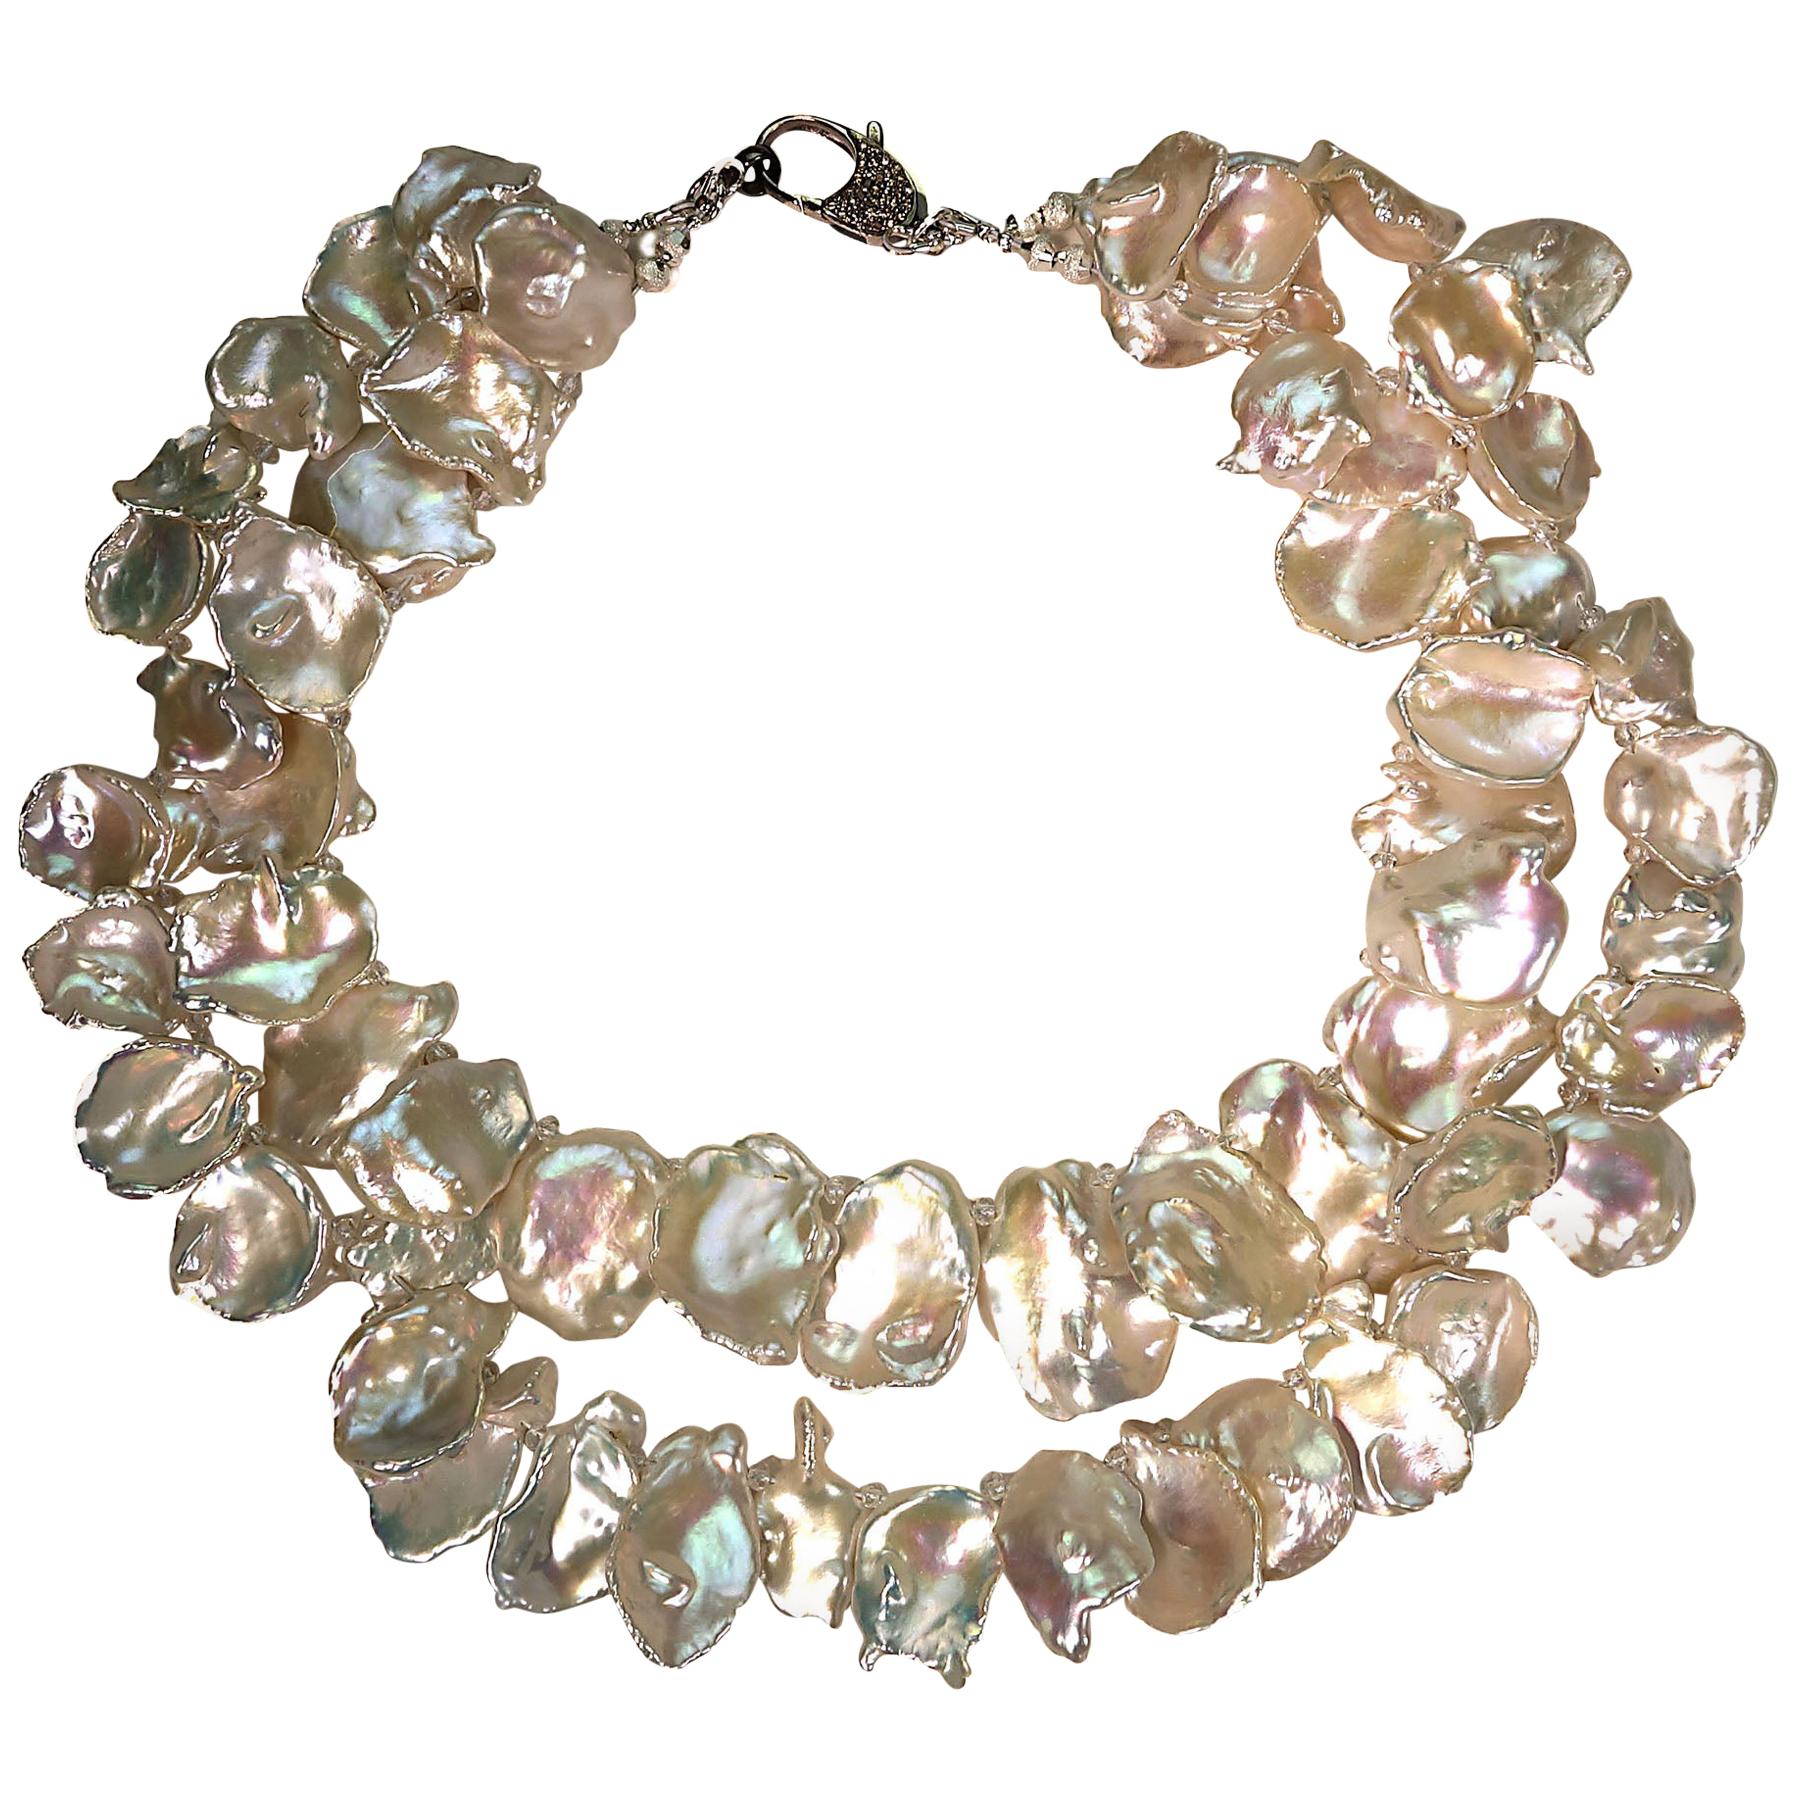 NEW IRIDESCENT WHITE PEARL 60" DOUBLE BEADED NECKLACE 